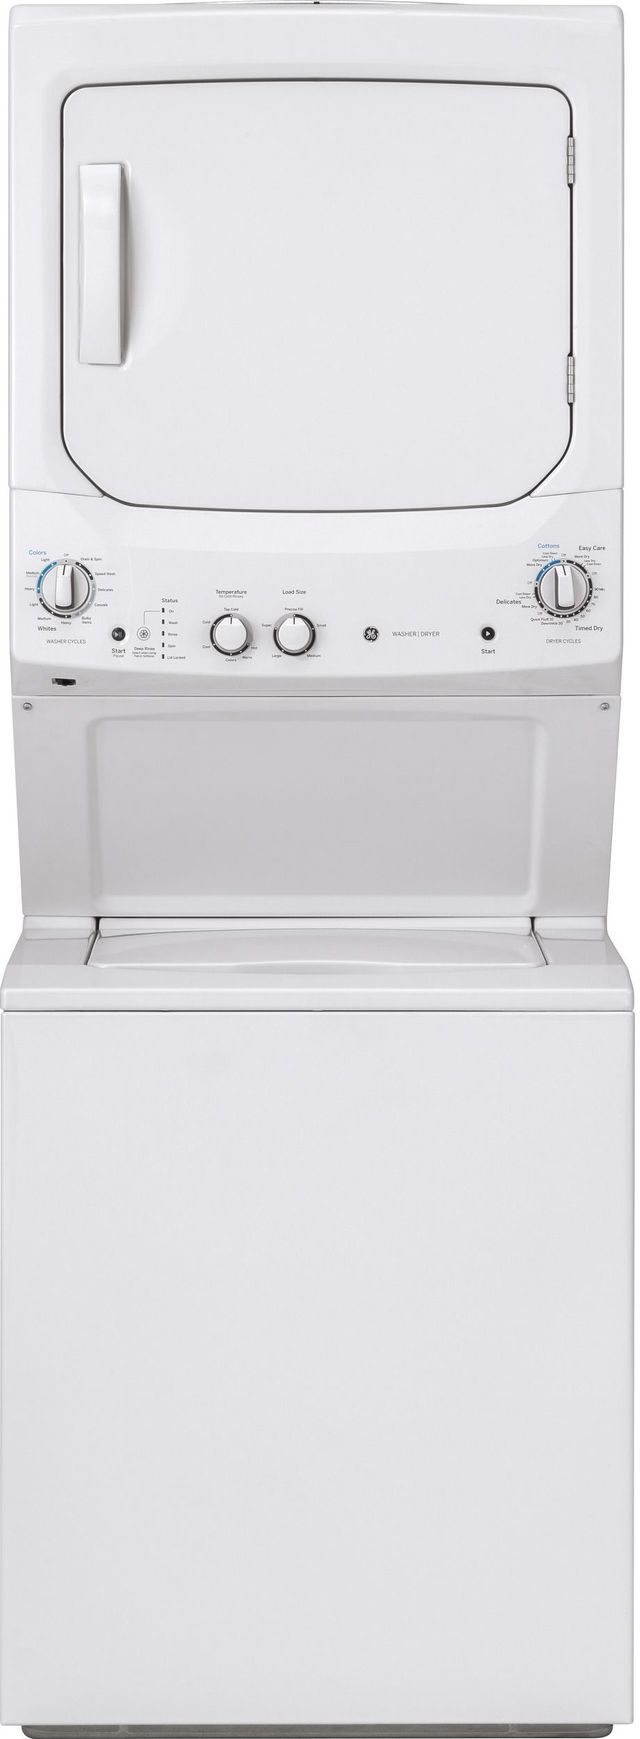 GE® Unitized Spacemaker® 3.8 Cu. Ft. Washer, 5.9 Cu. Ft. Dryer White On White Gas Stack Laundry